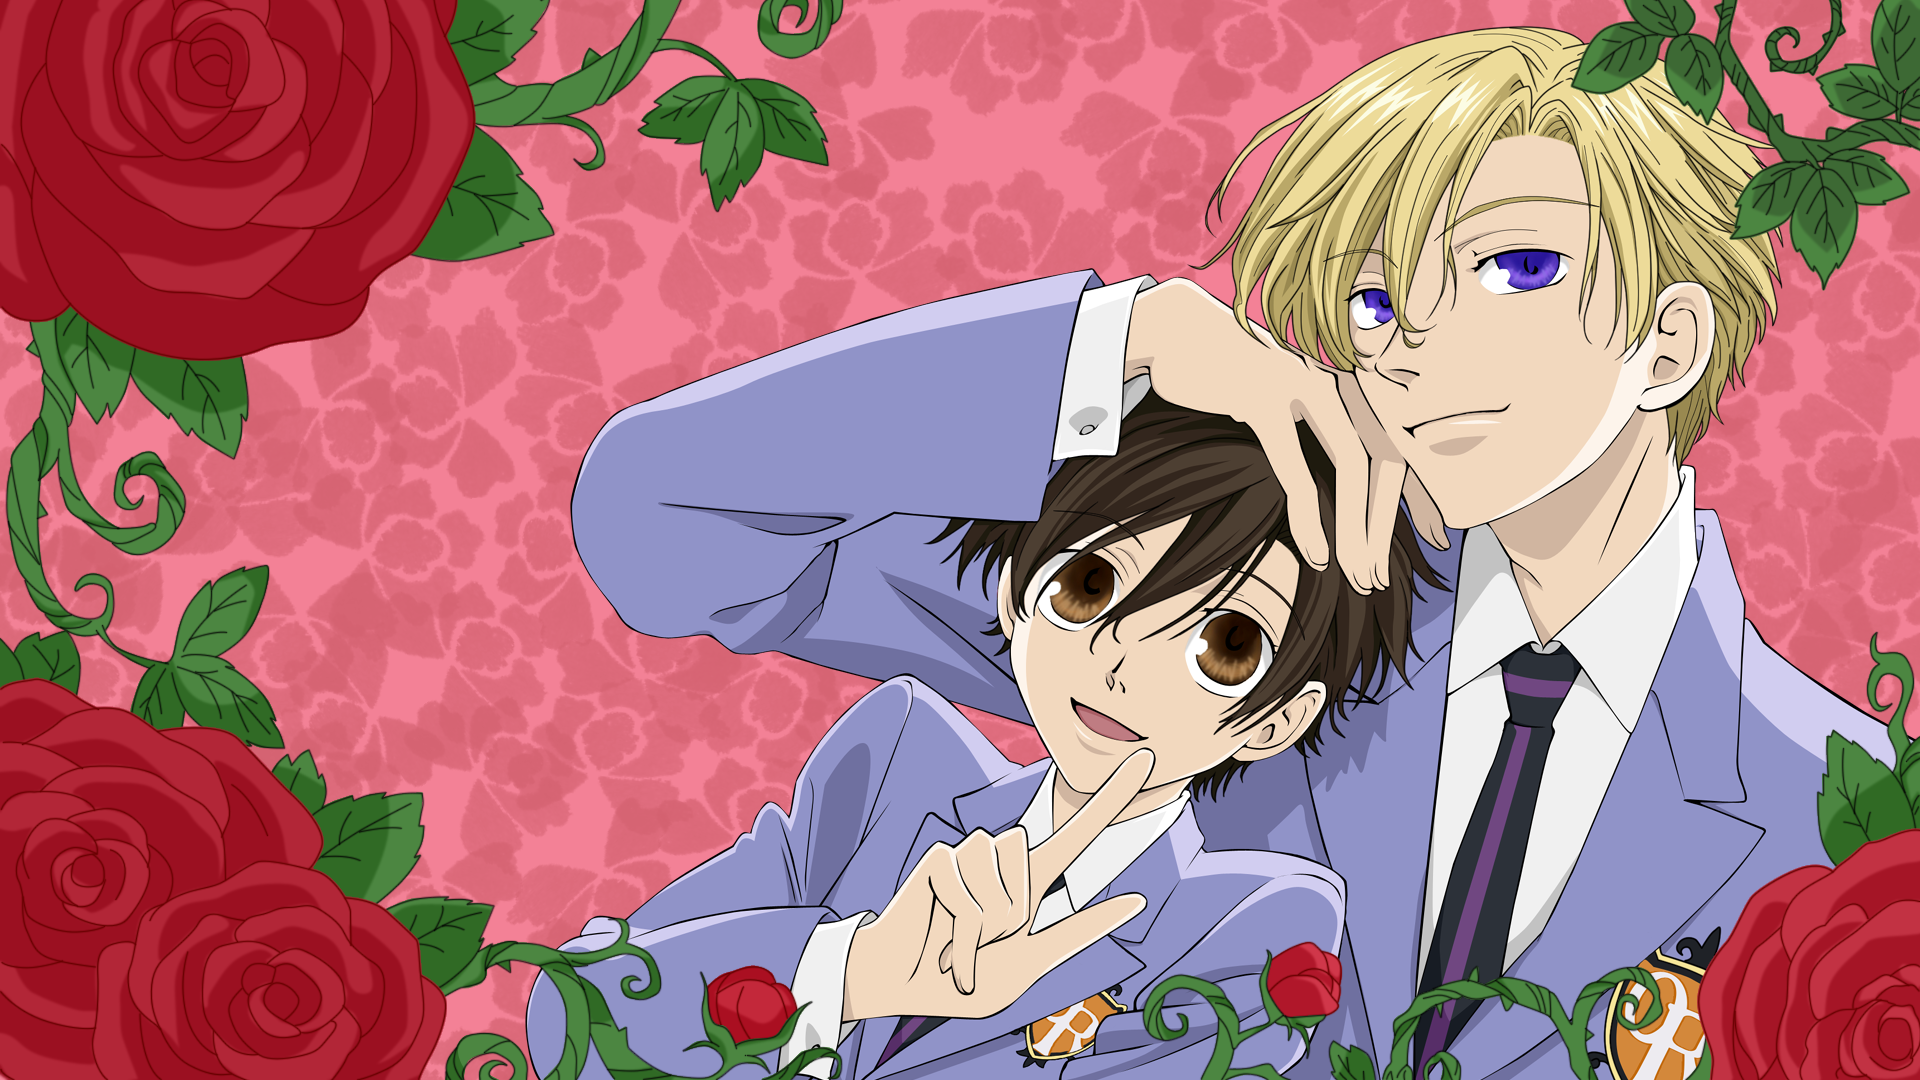 2. Tamaki Suoh from Ouran High School Host Club - wide 8